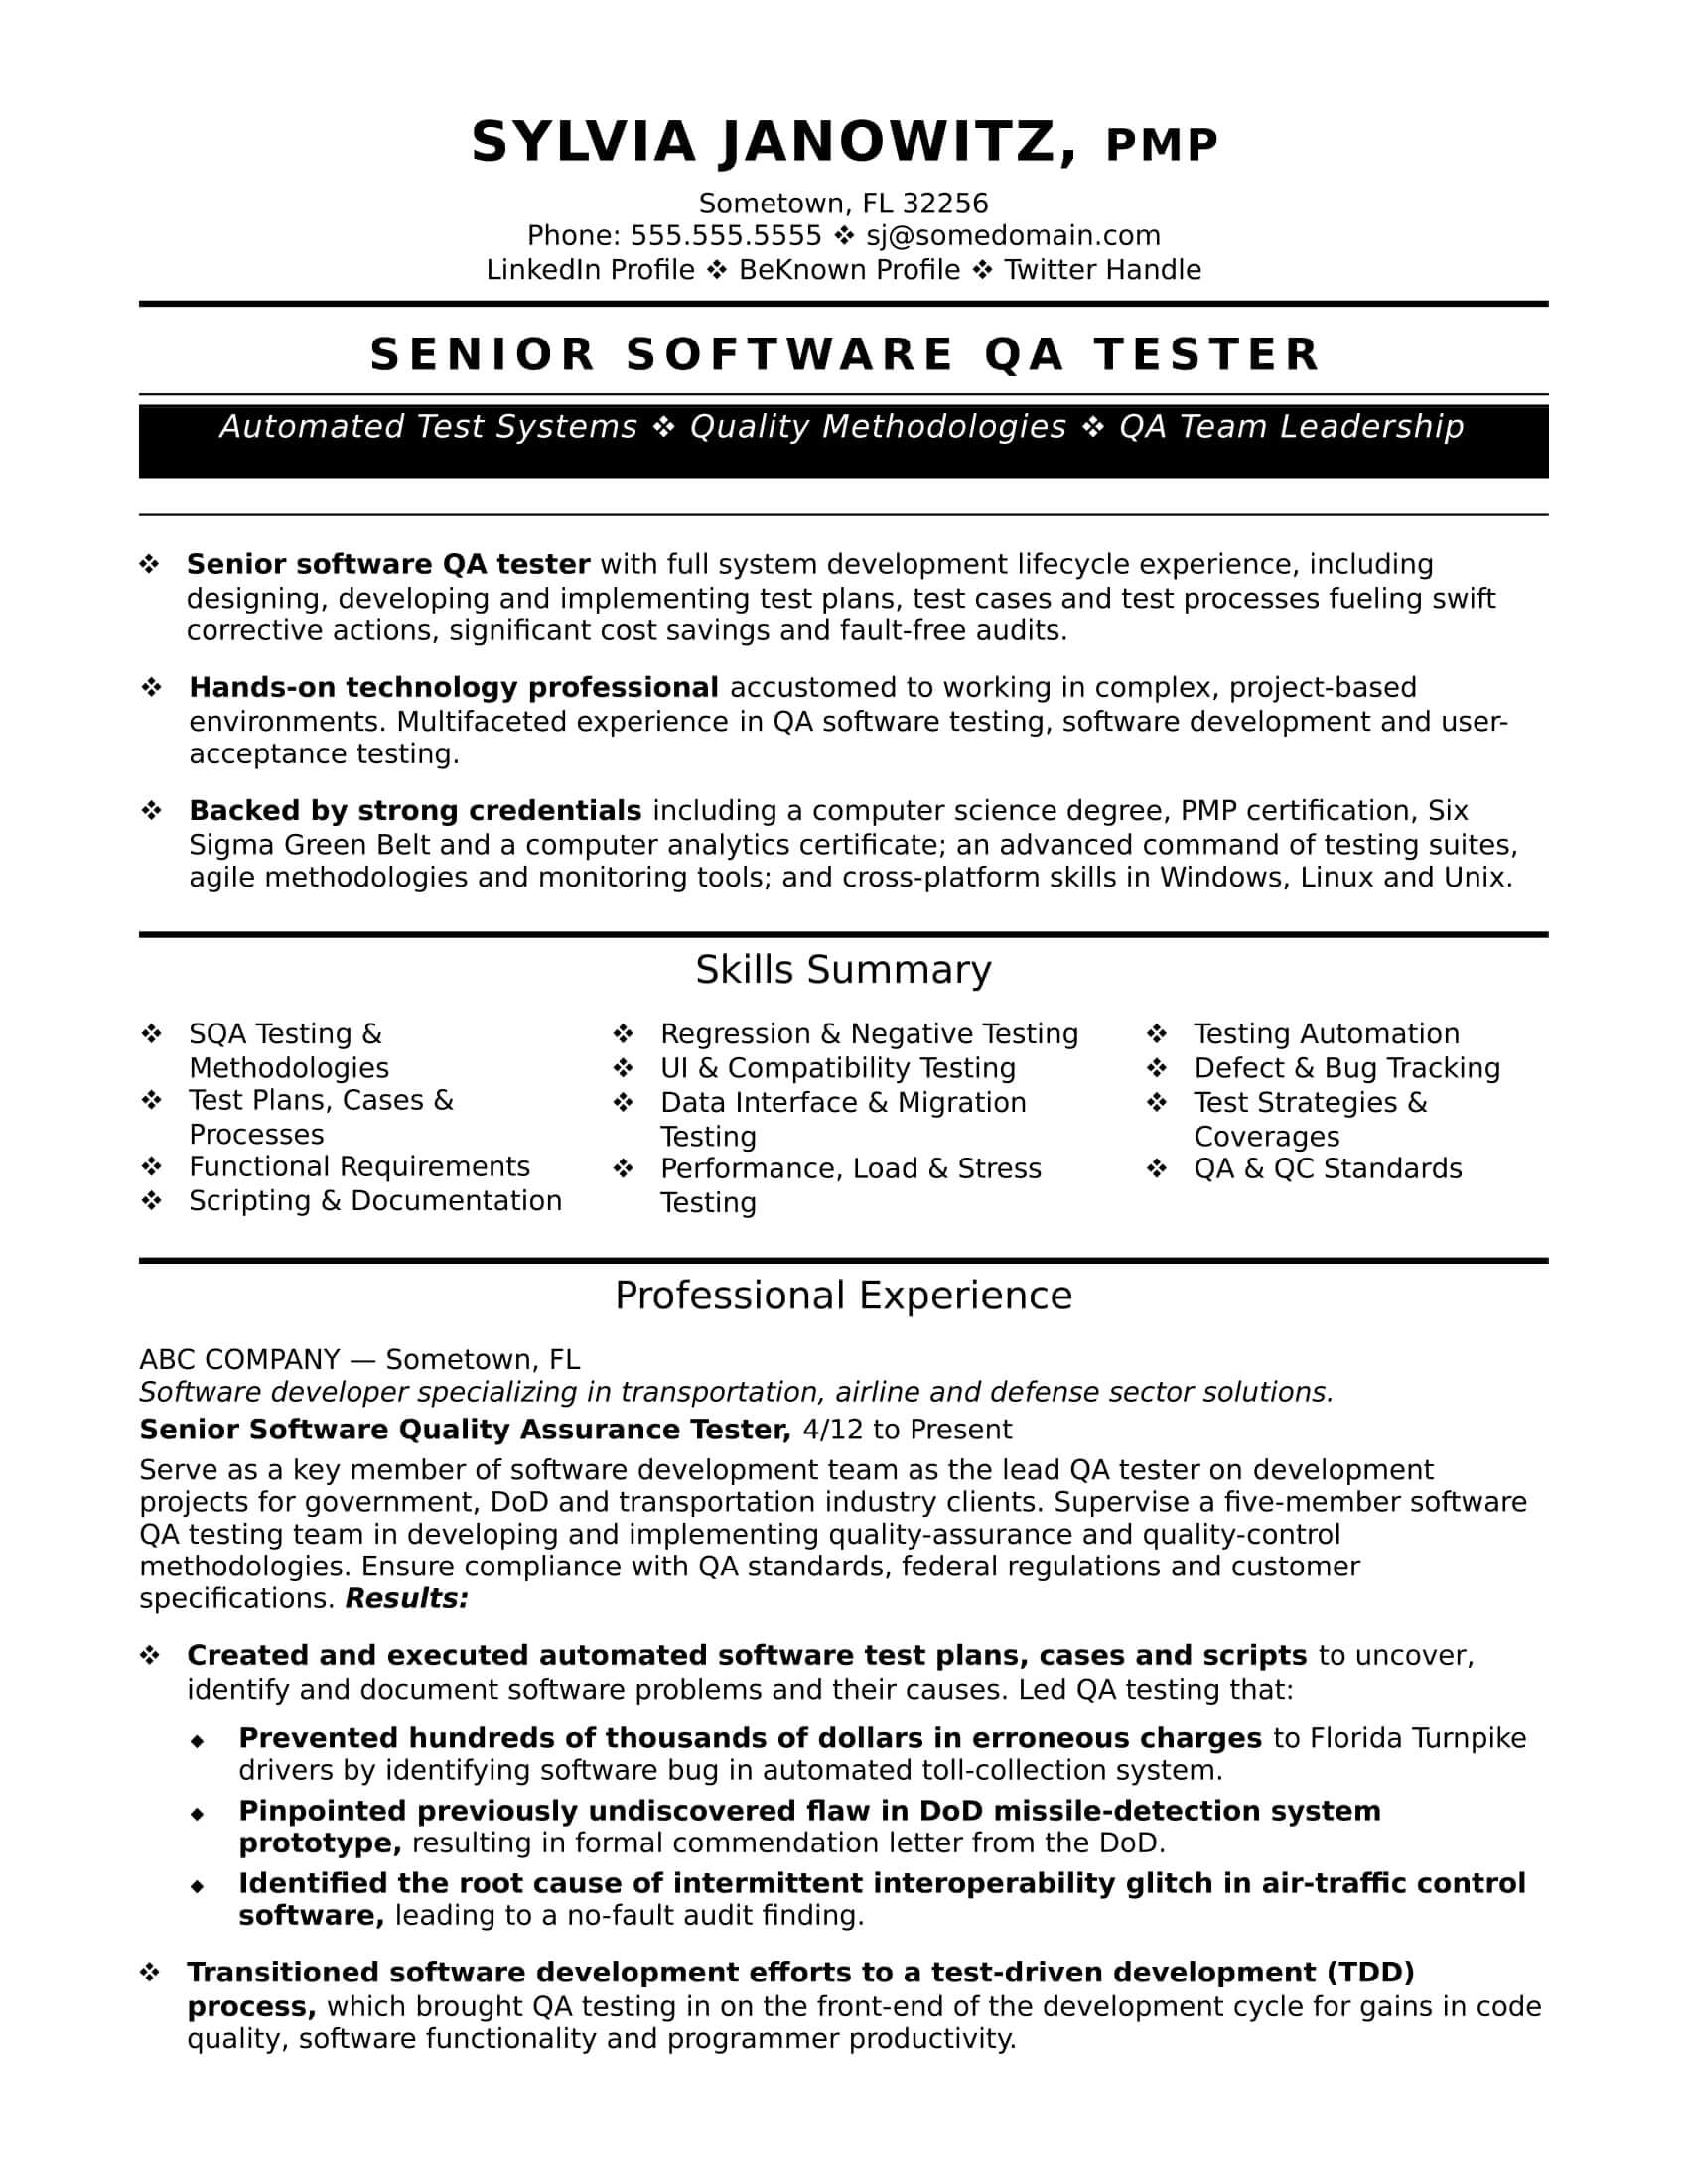 Experienced Qa Software Tester Resume Sample | Monster in ...